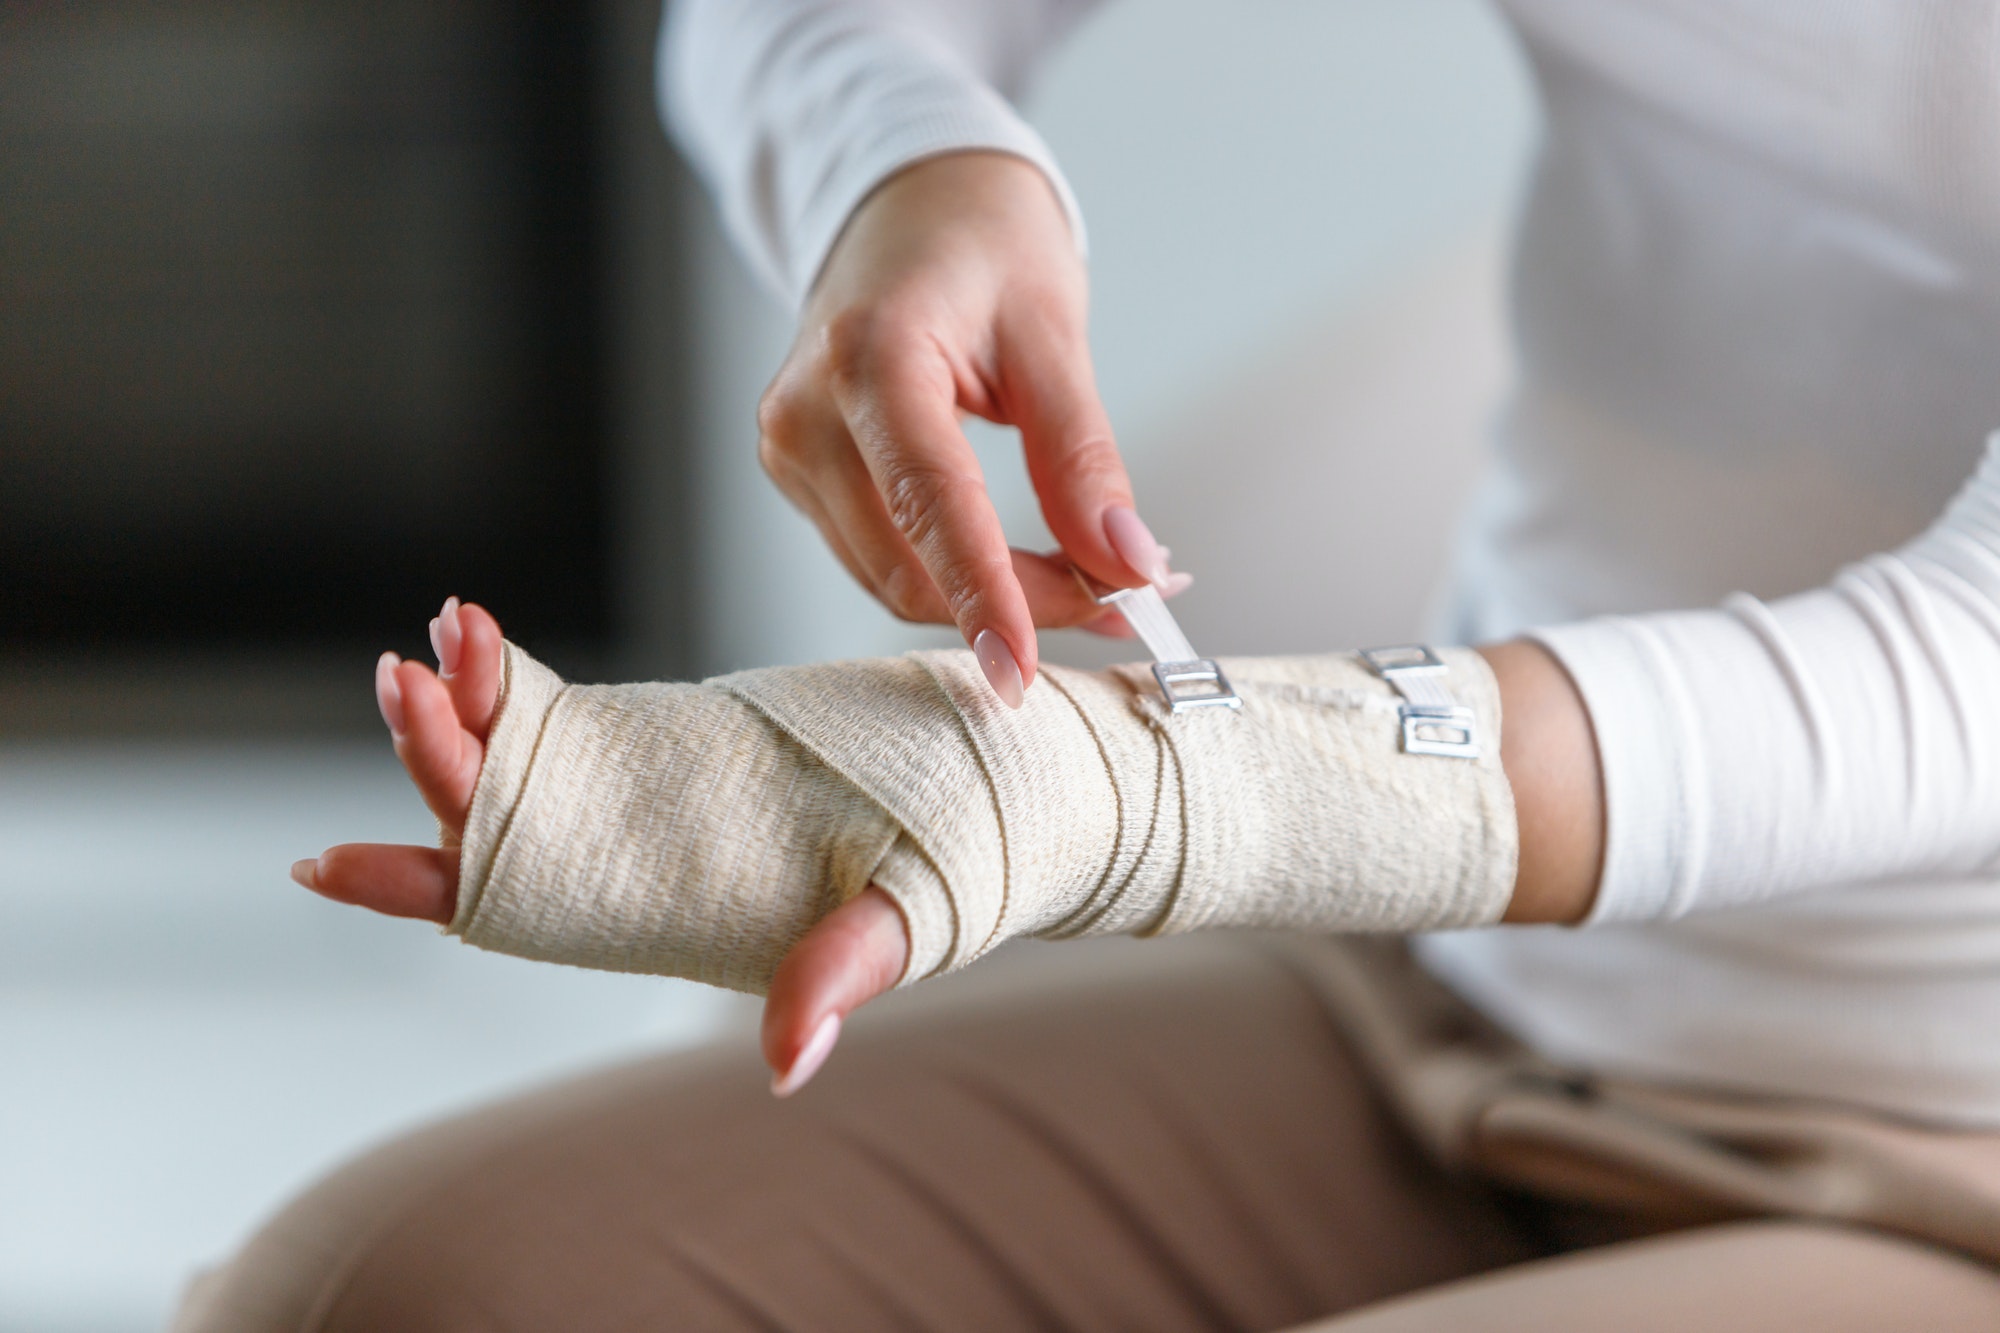 woman wrapping her painful wrist with elastic orthopedic bandage